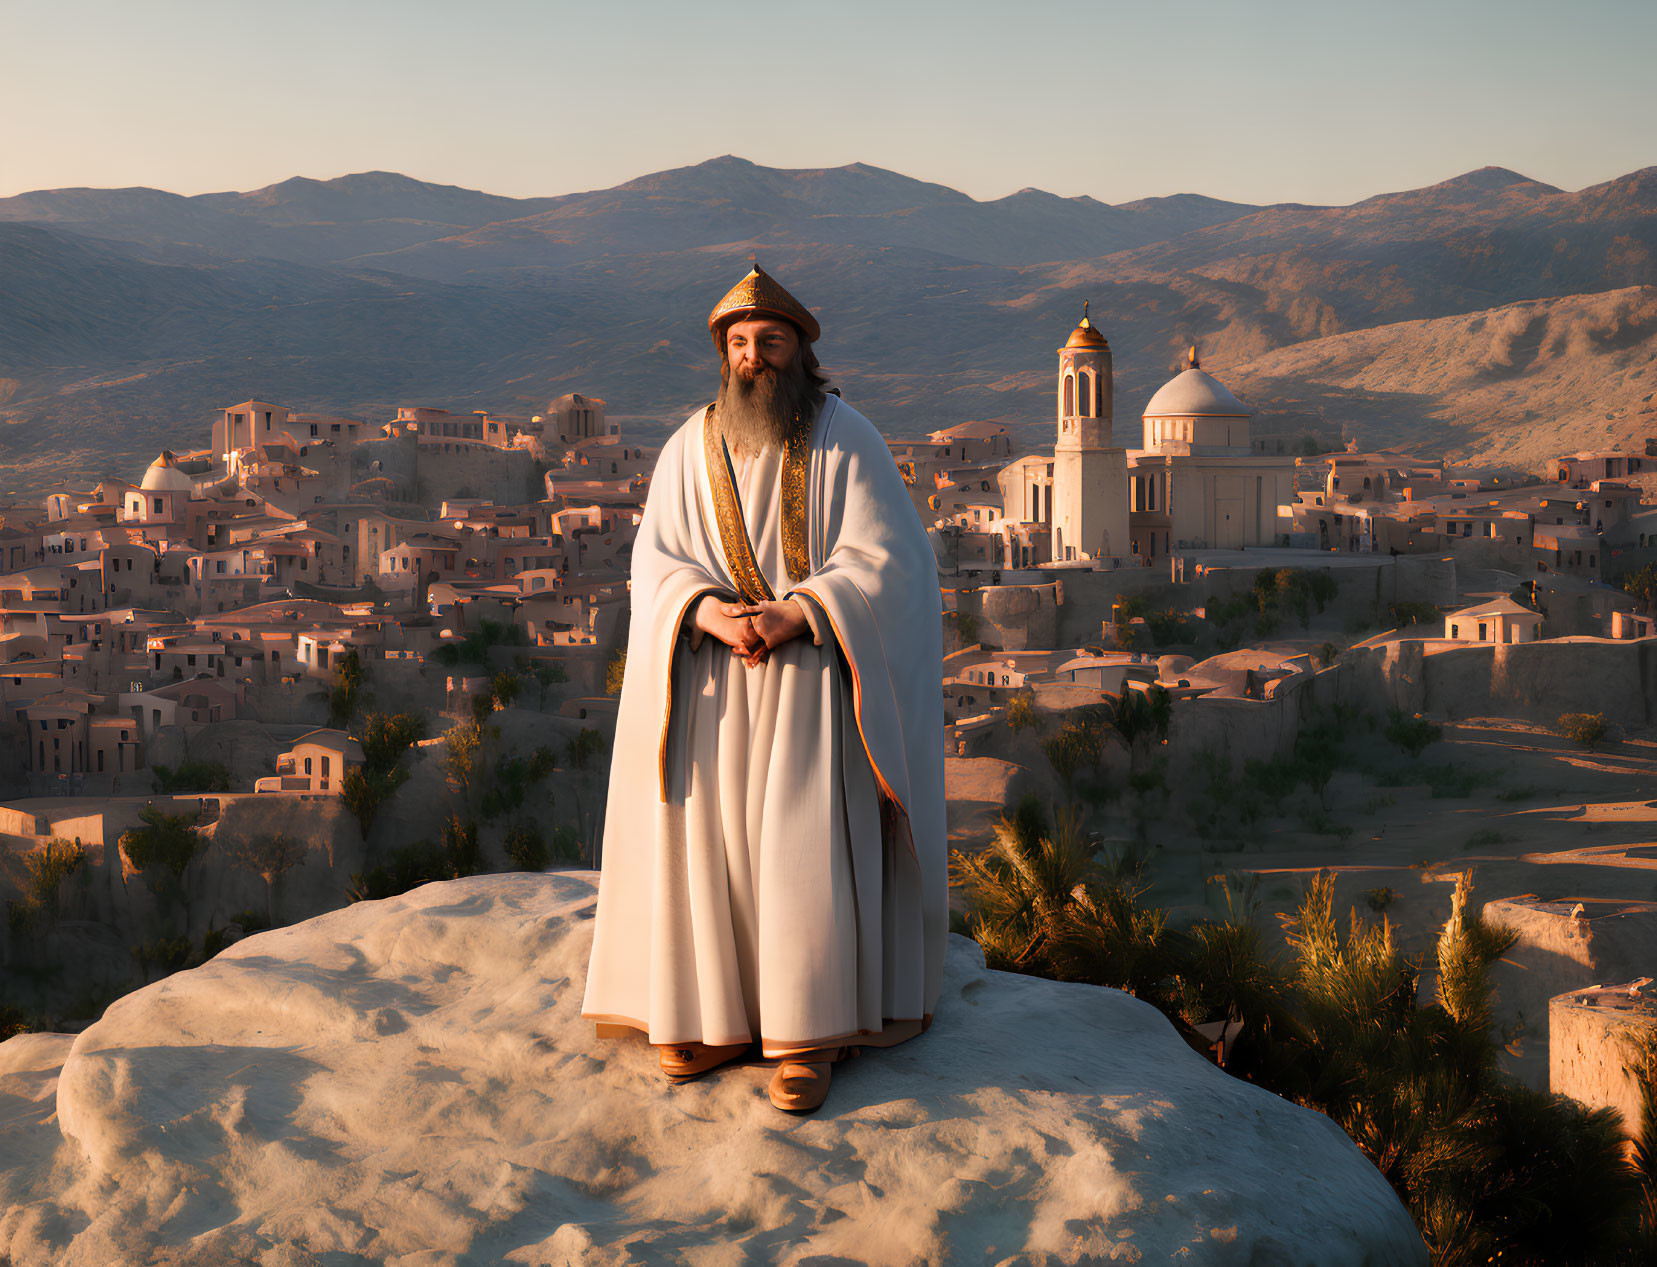 Traditional Middle Eastern Attire Man Overlooking Ancient Village at Sunset